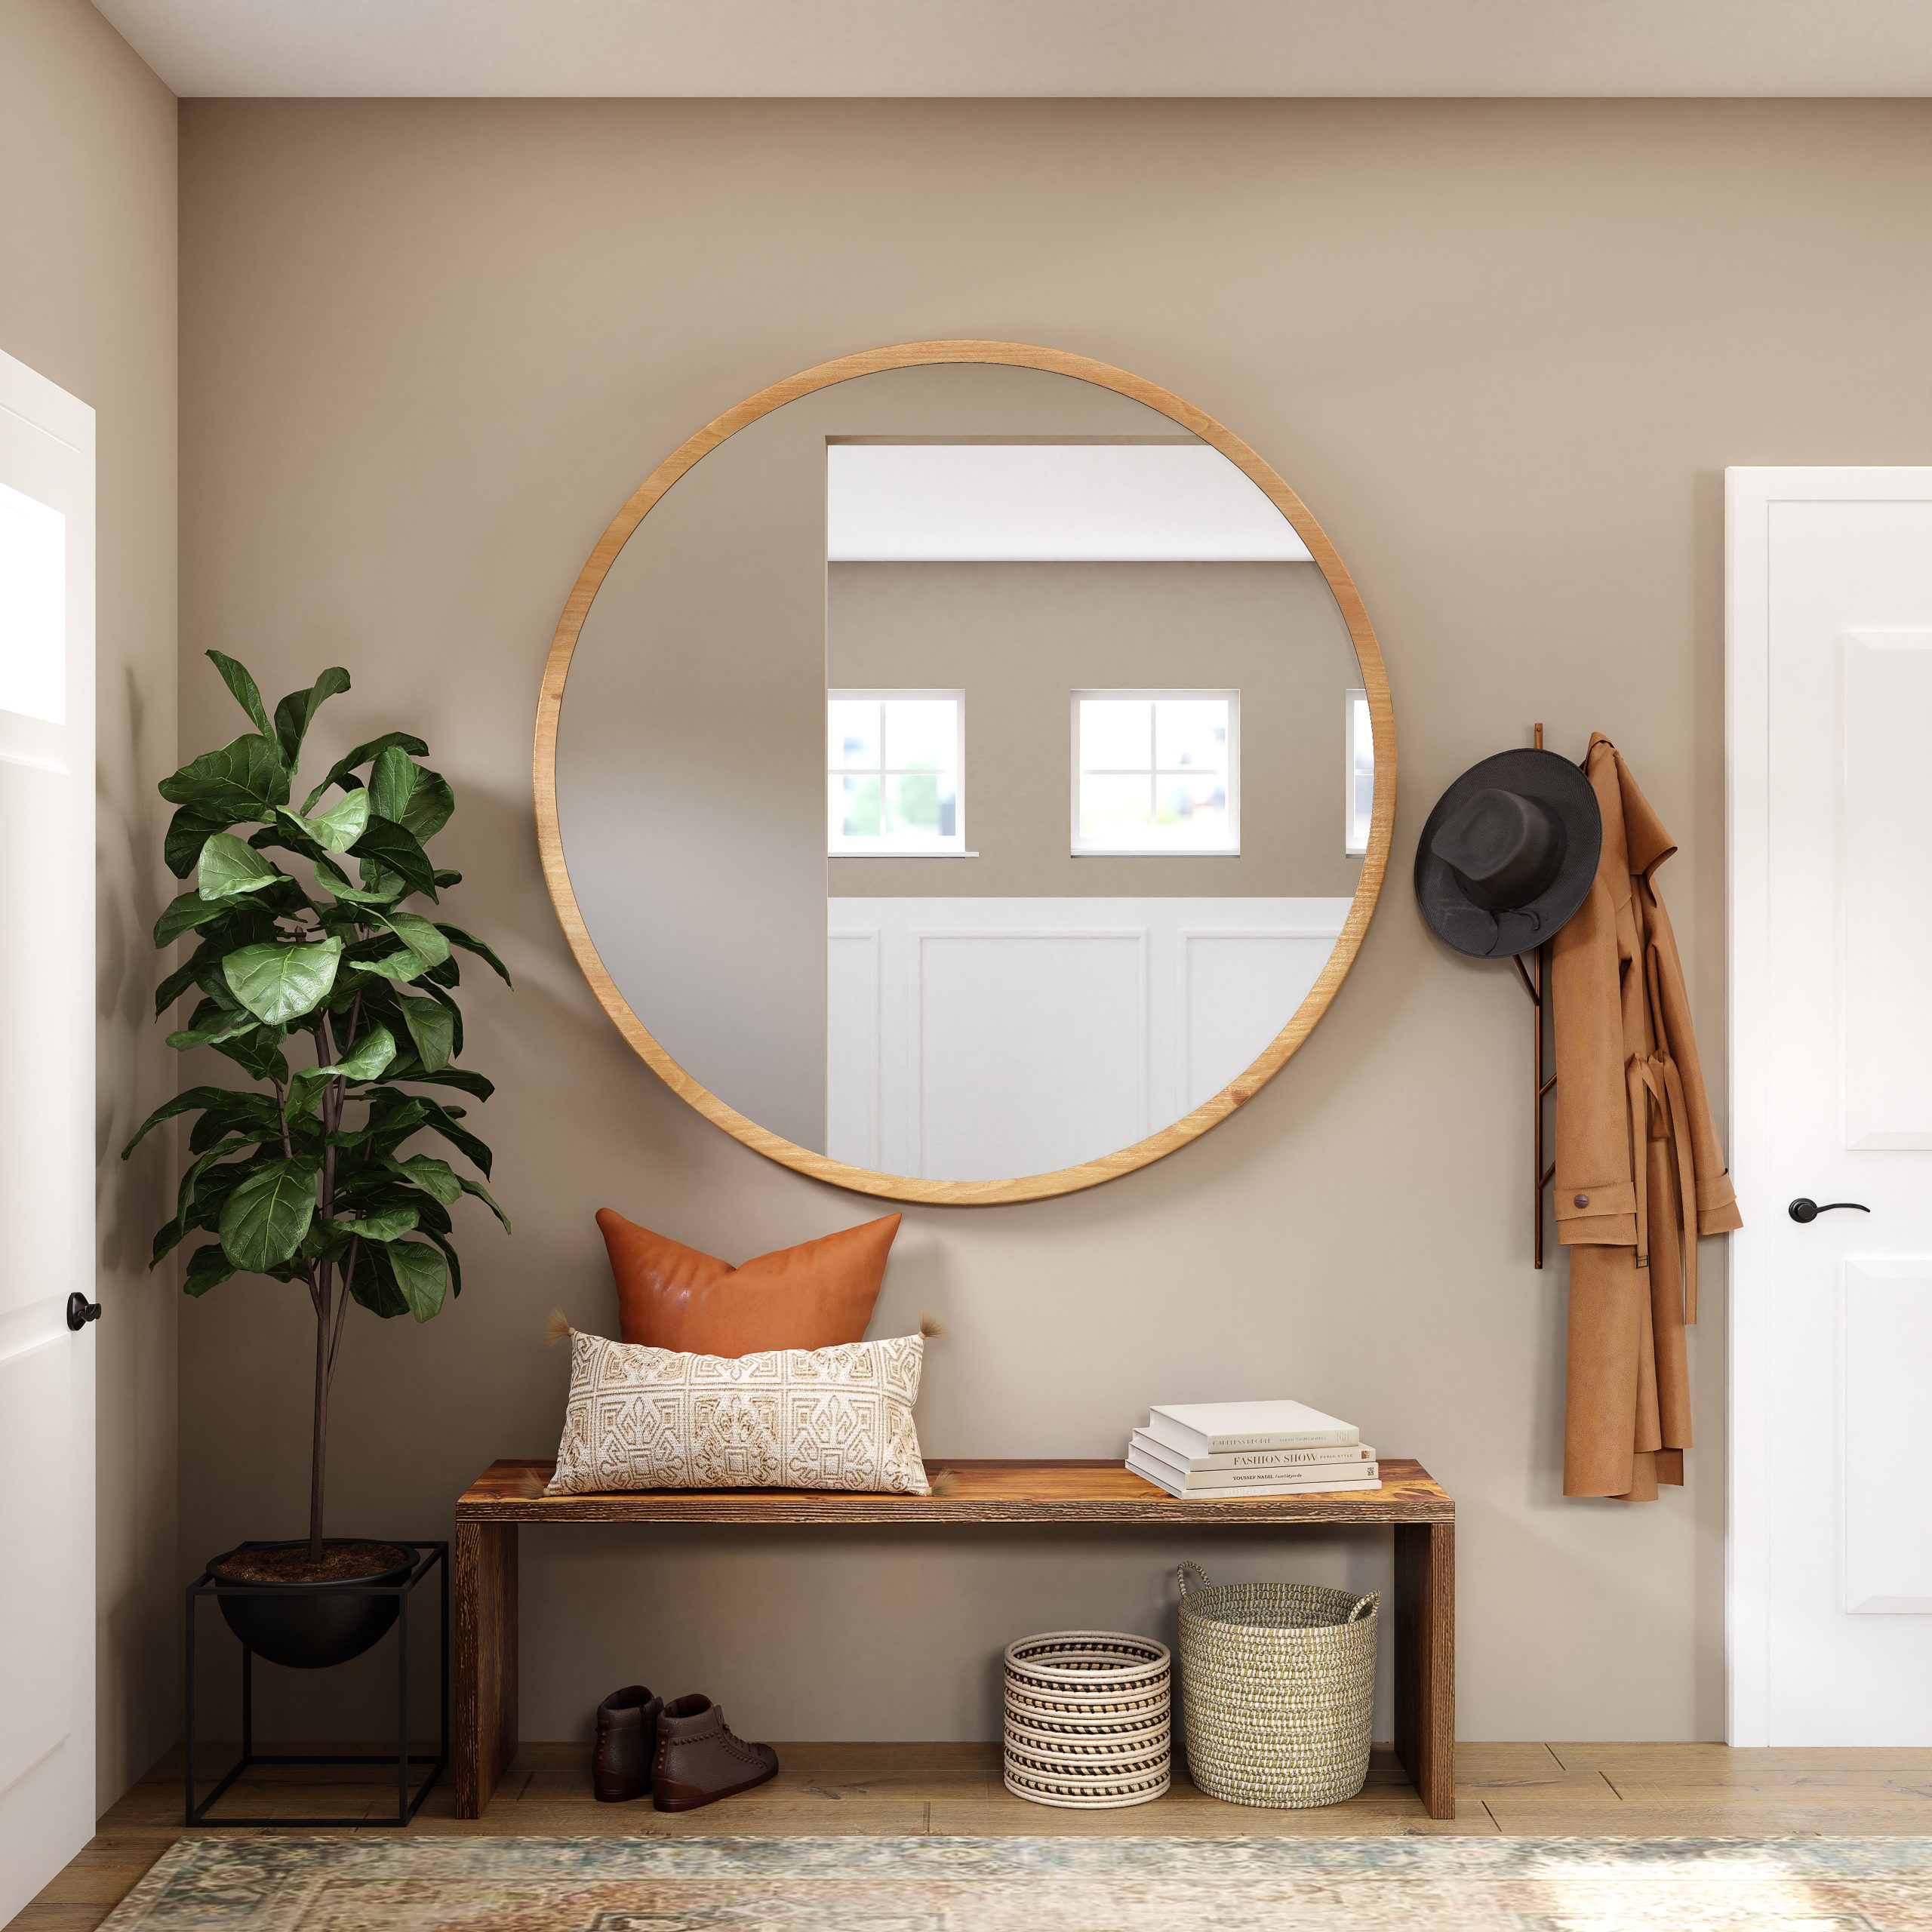 How Mirrors Can Be Used to Transform Your Home